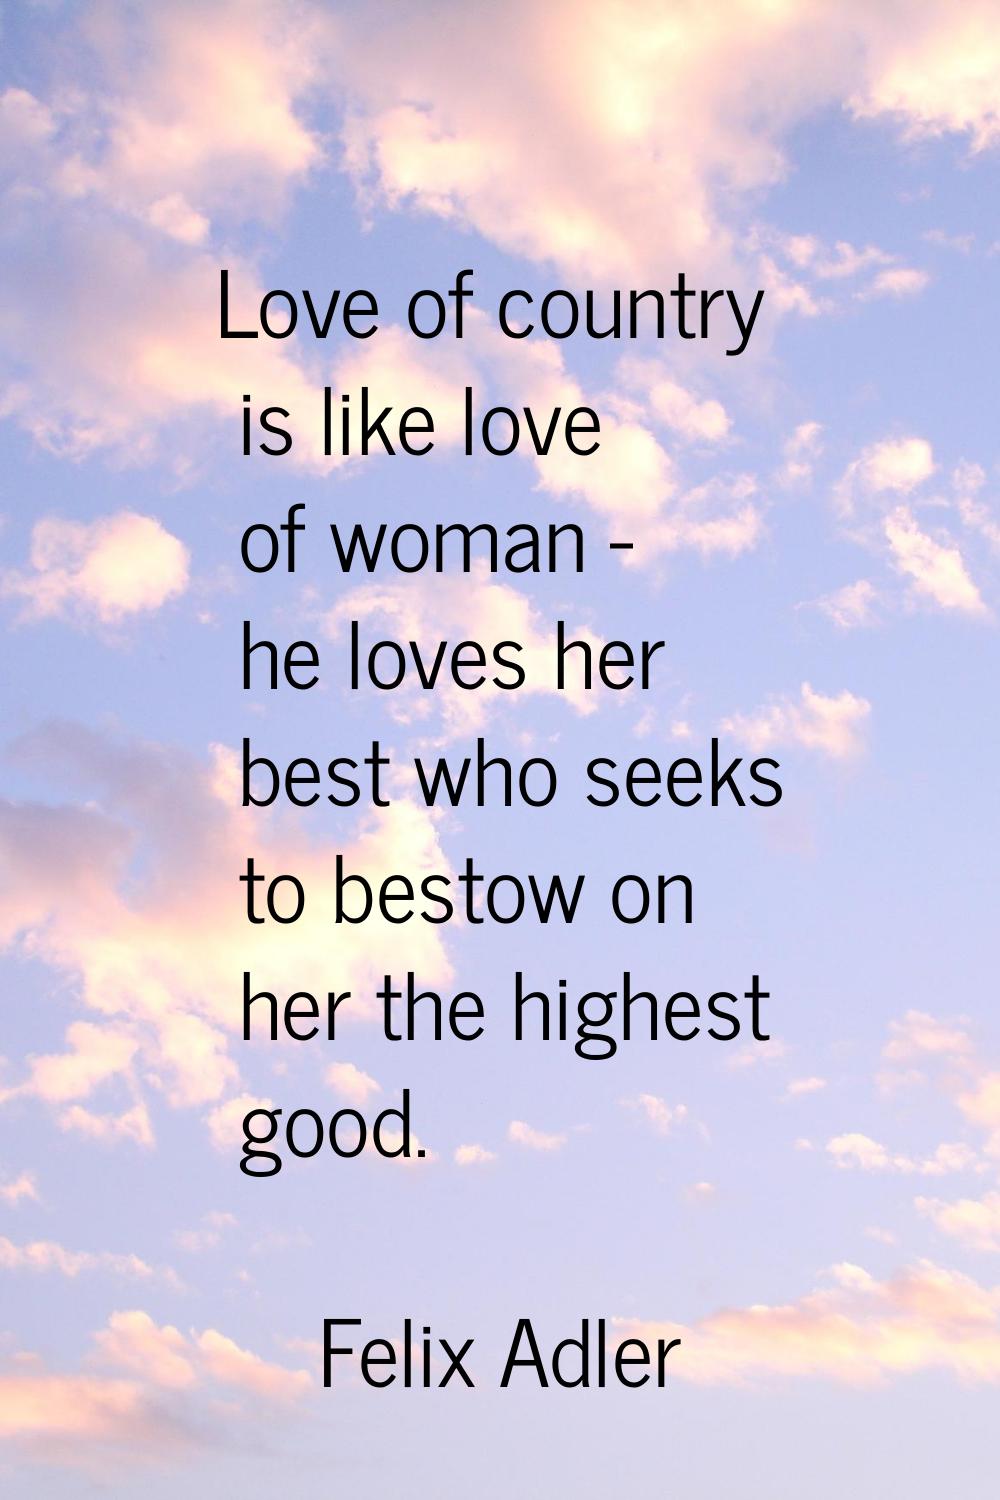 Love of country is like love of woman - he loves her best who seeks to bestow on her the highest go